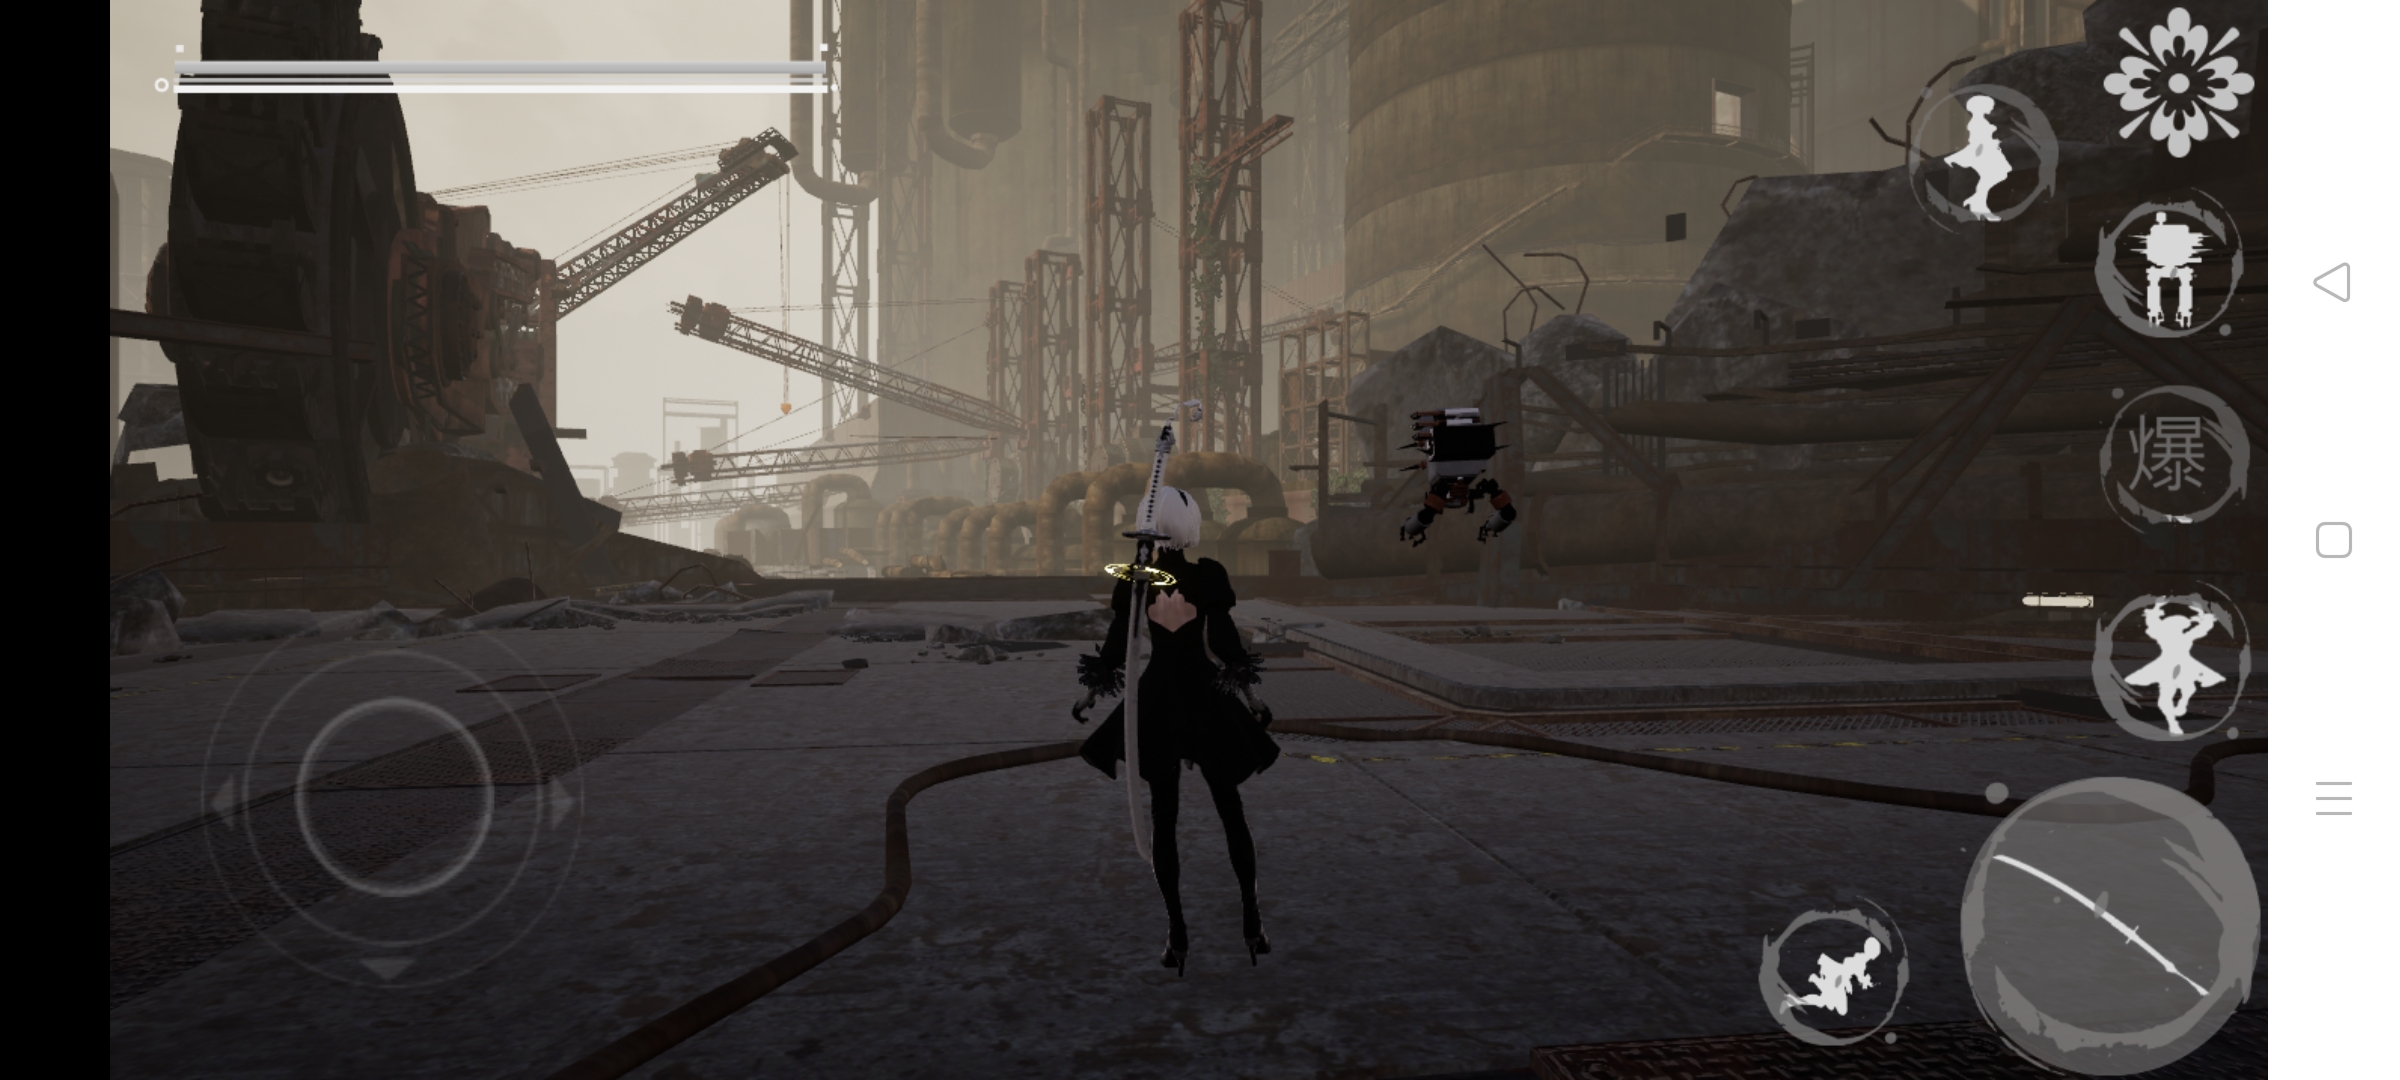 [Game Android] NieR Automata